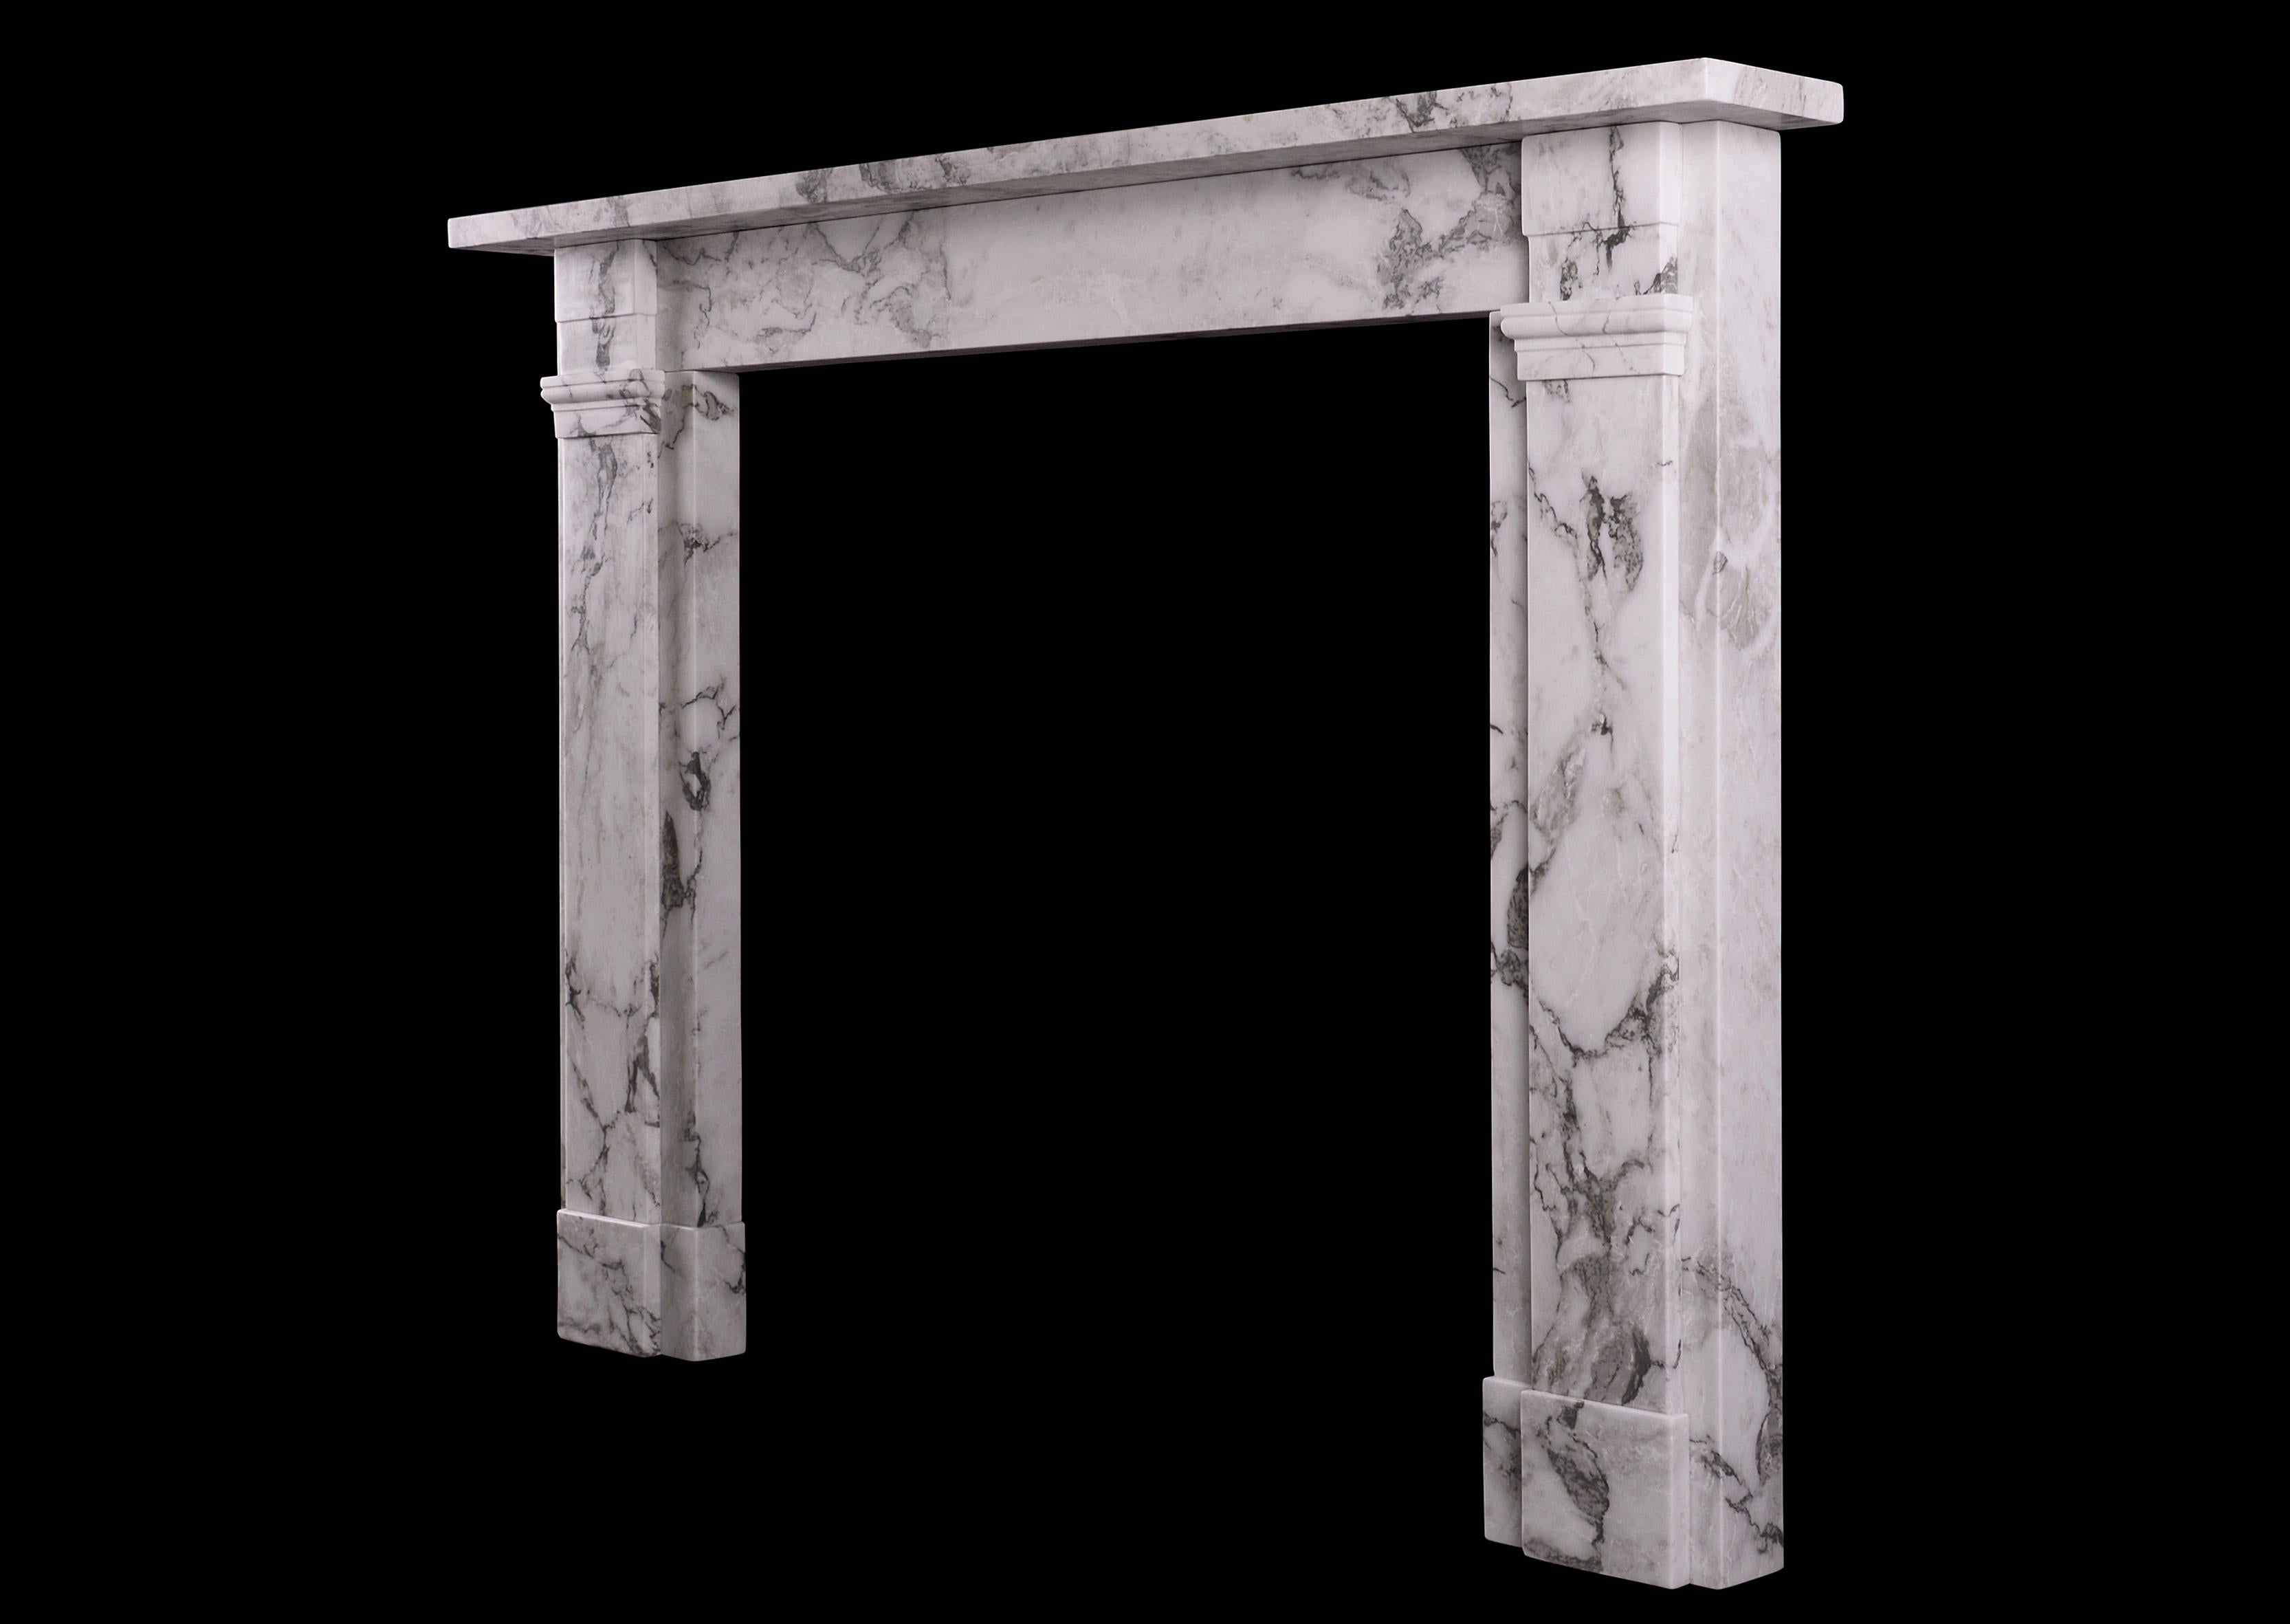 A simple English fireplace in Italian Arabescato marble. The jambs surmounted by moulded capital, with stepped frieze. Plain shelf above. A copy of an original Regency fireplace. N.B. May be subject to an extended lead time, please enquire for more